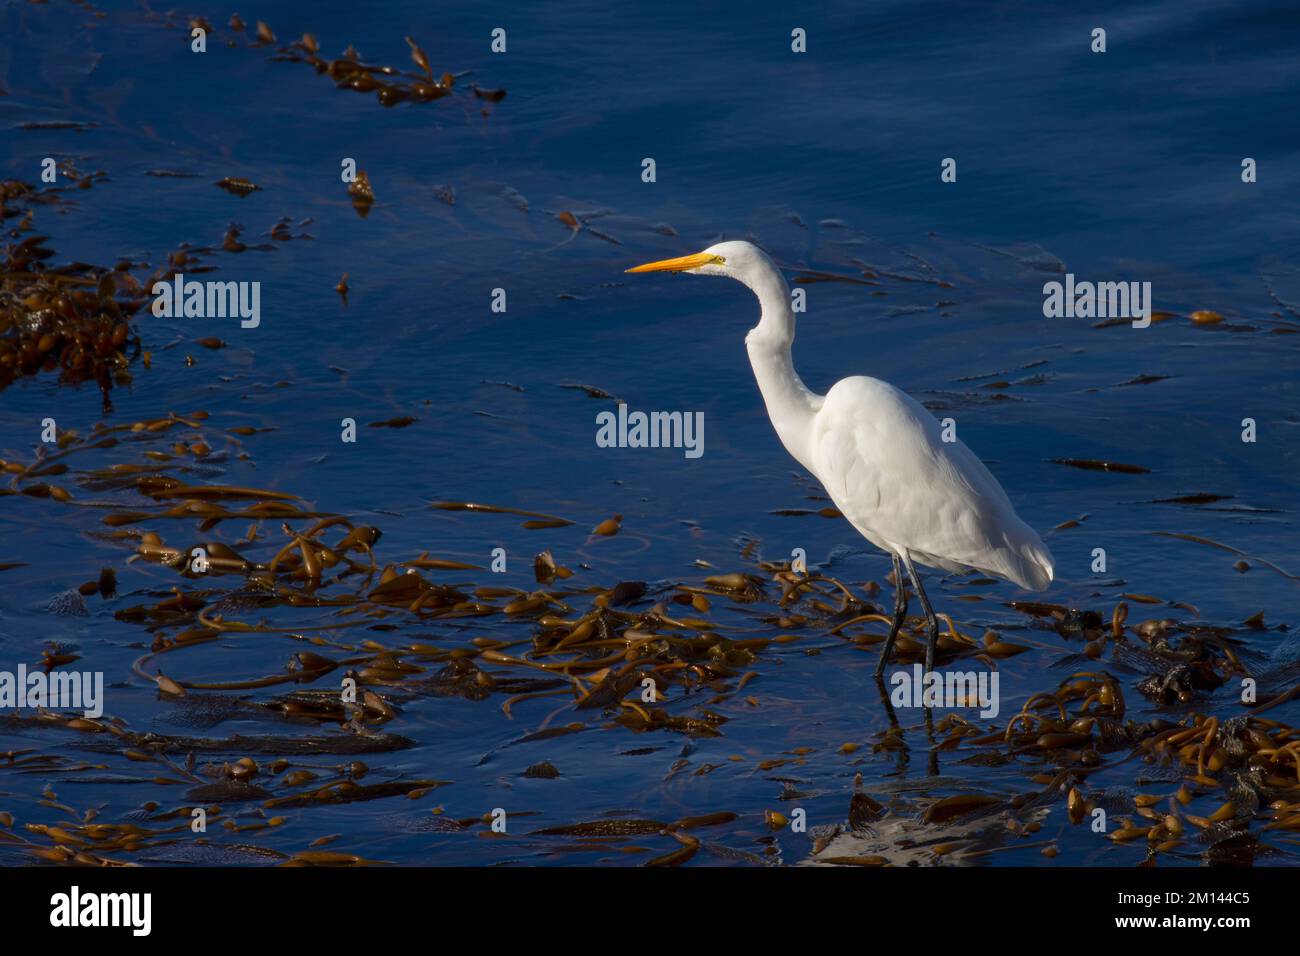 Great egret (Ardea alba) at Whalers Cove, Point Lobos State Reserve, Big Sur Coast Highway Scenic Byway, California Stock Photo